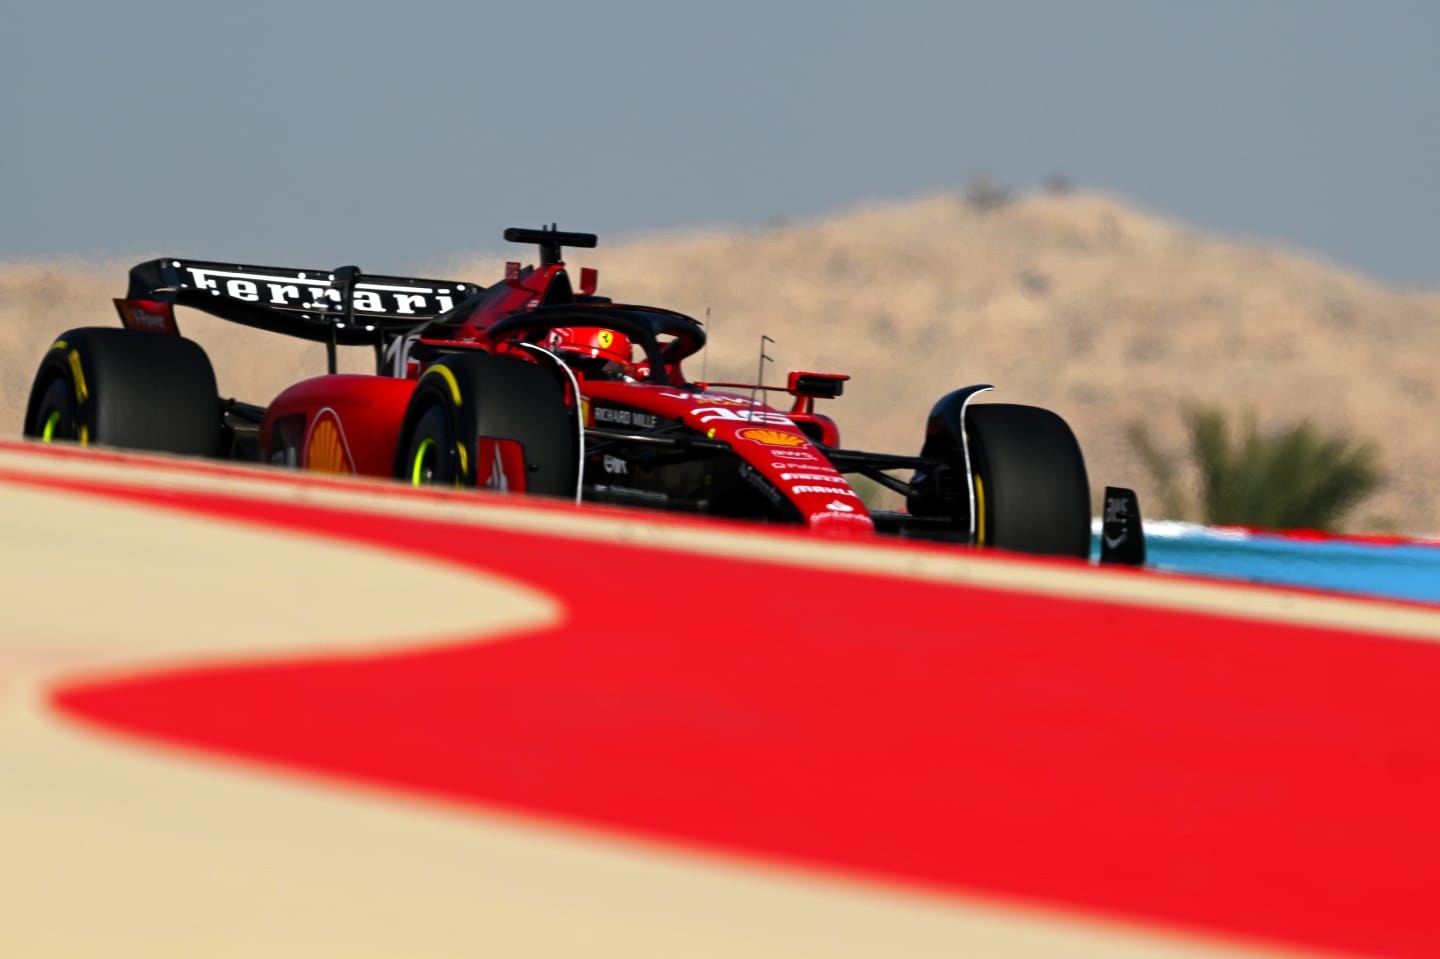 BAHRAIN, BAHRAIN - MARCH 03: Charles Leclerc of Monaco driving the (16) Ferrari SF-23 on track during practice ahead of the F1 Grand Prix of Bahrain at Bahrain International Circuit on March 03, 2023 in Bahrain, Bahrain. (Photo by Clive Mason/Getty Images)